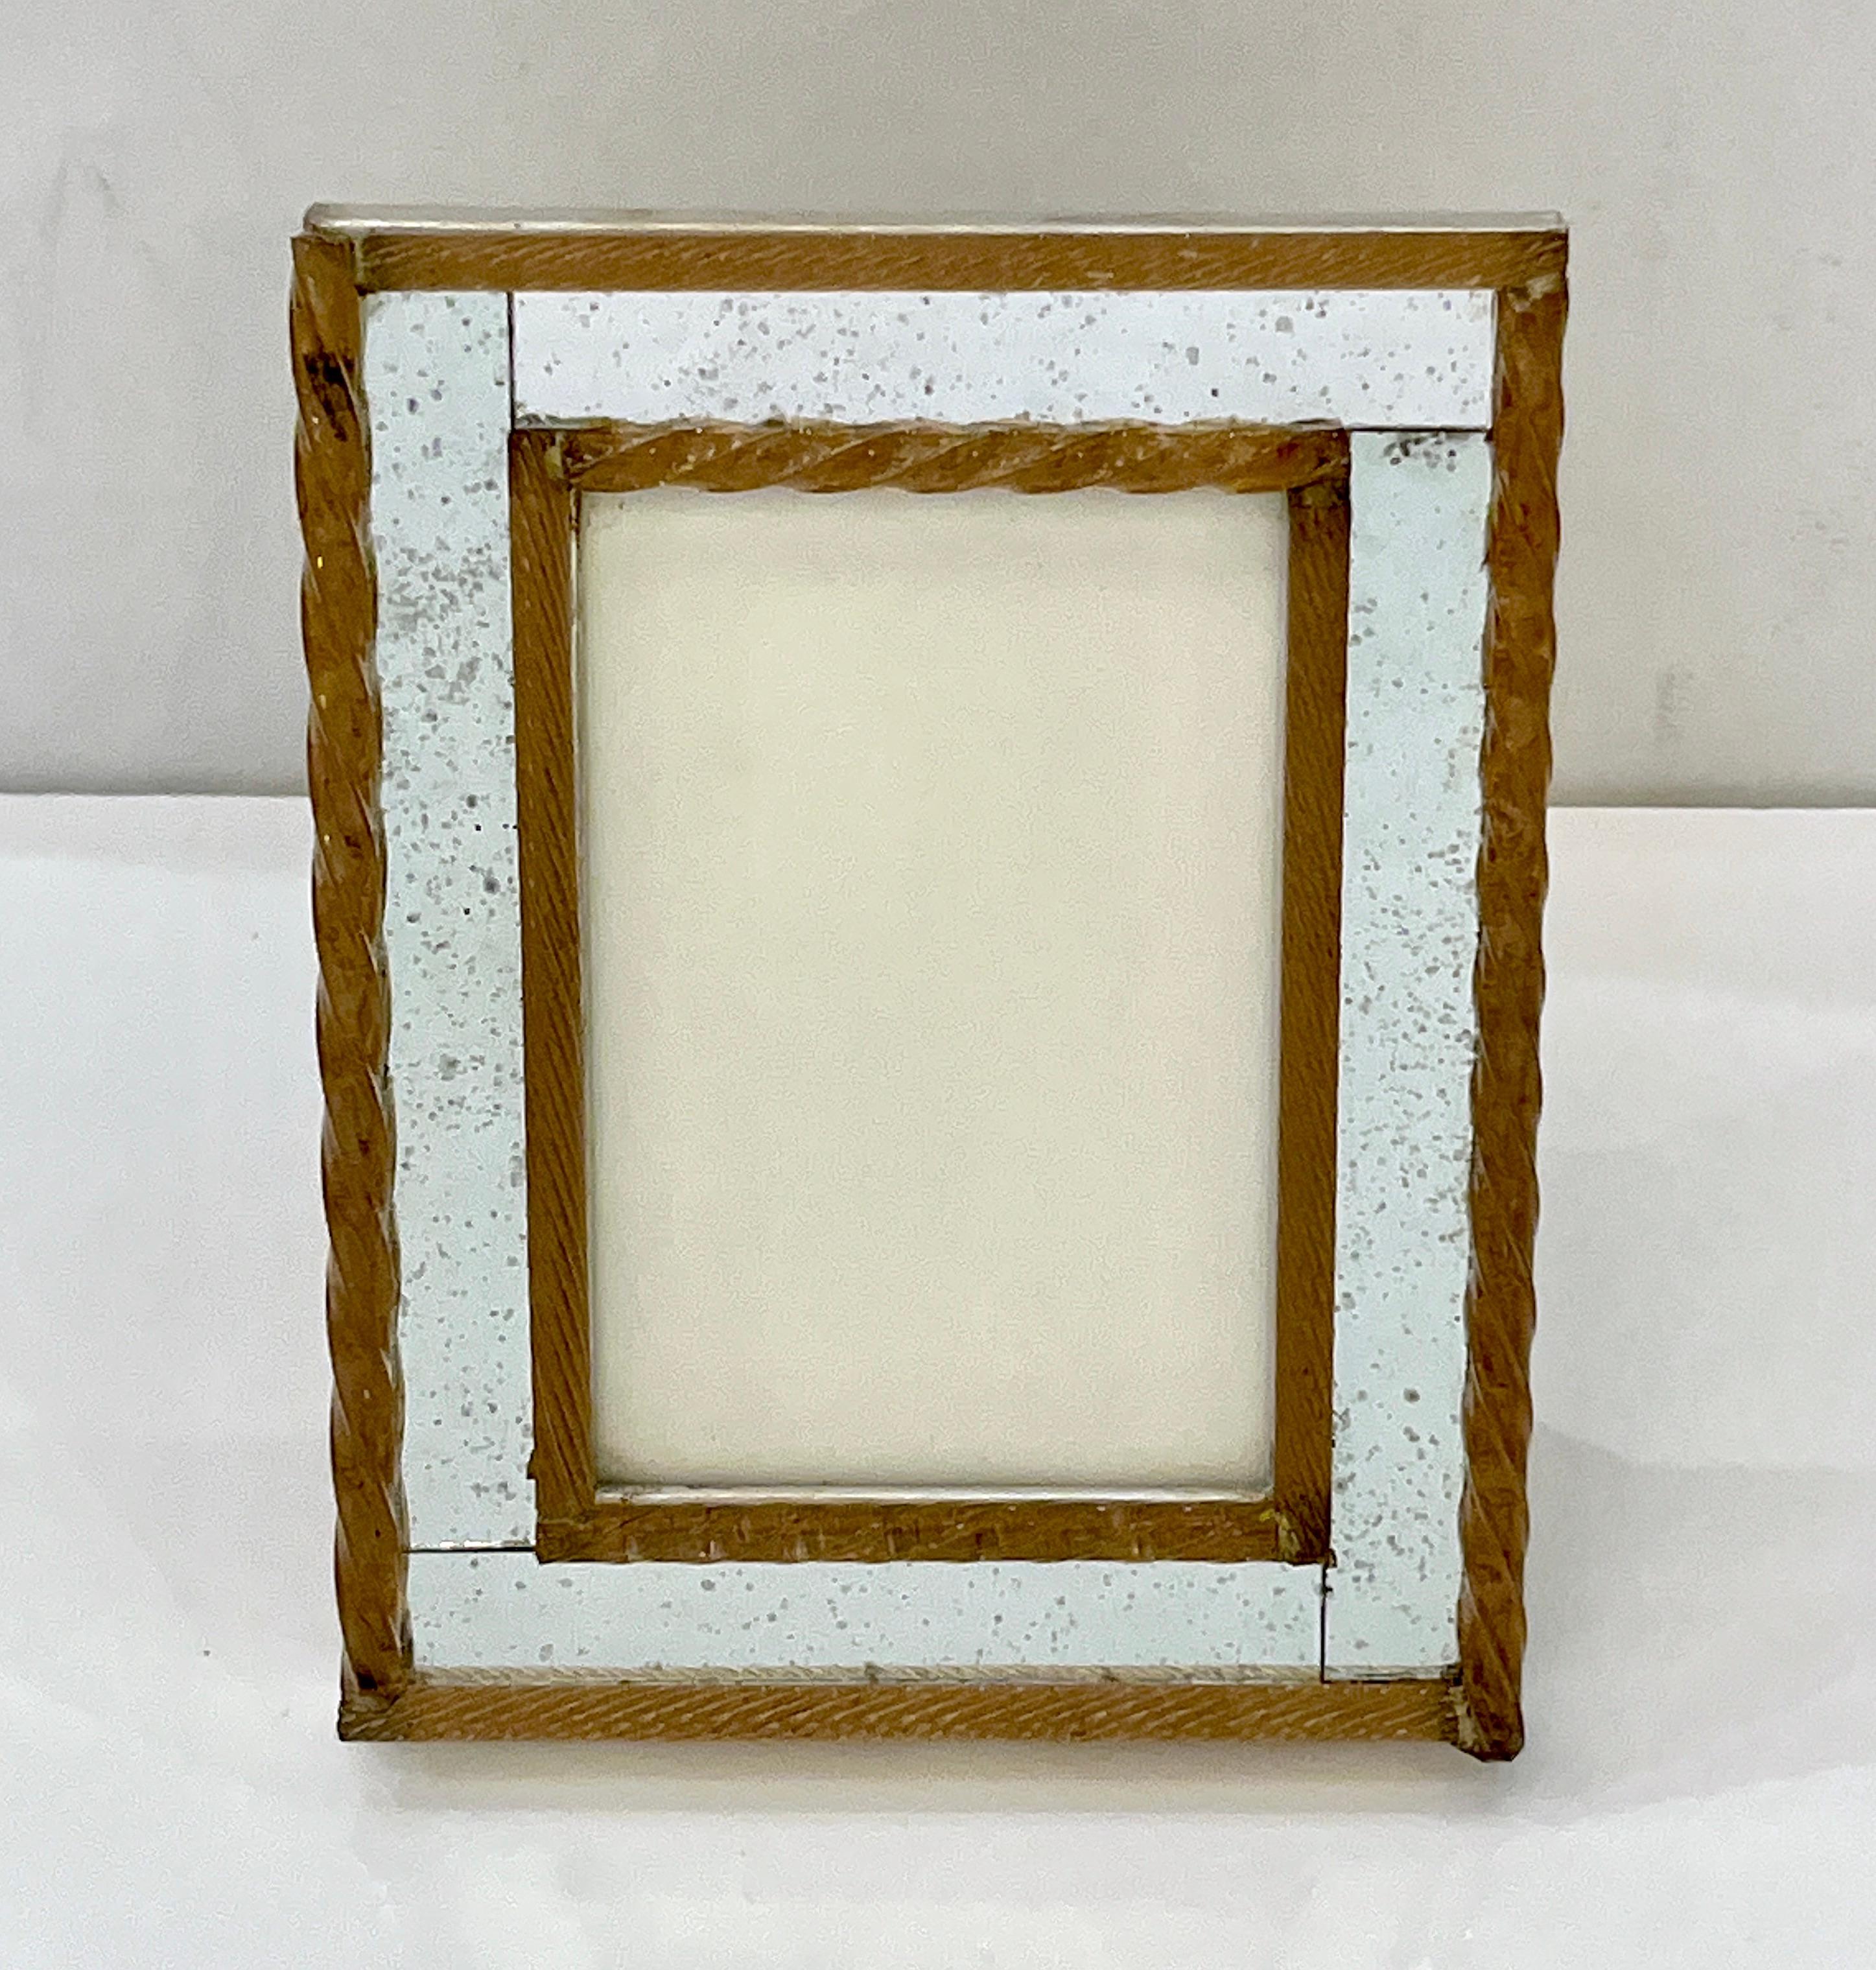 A 1960s elegant Italian vintage minimalist picture frame to add style and simple sophistication to any room. The vintage speckled mirrored frame is double-edged in relief by twisted amber glass baguettes with two different types of twists. The